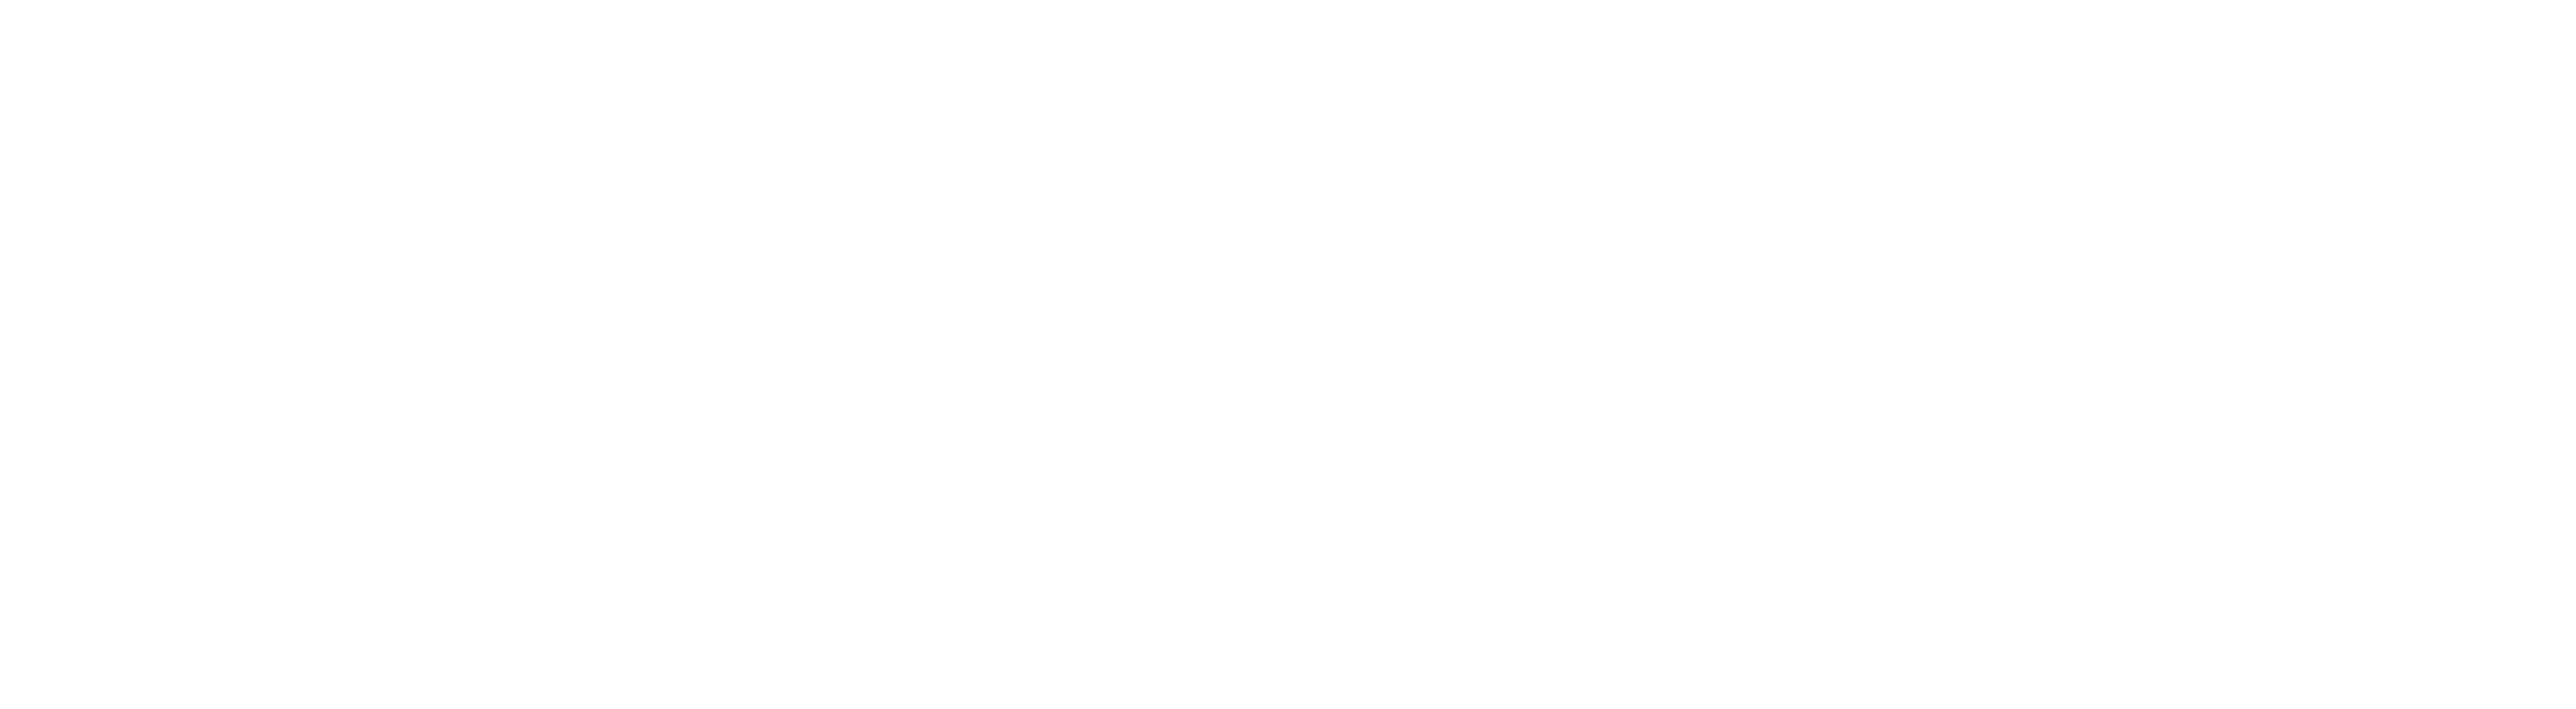 Retail Awards & MARKETPLACE CEE/SEE